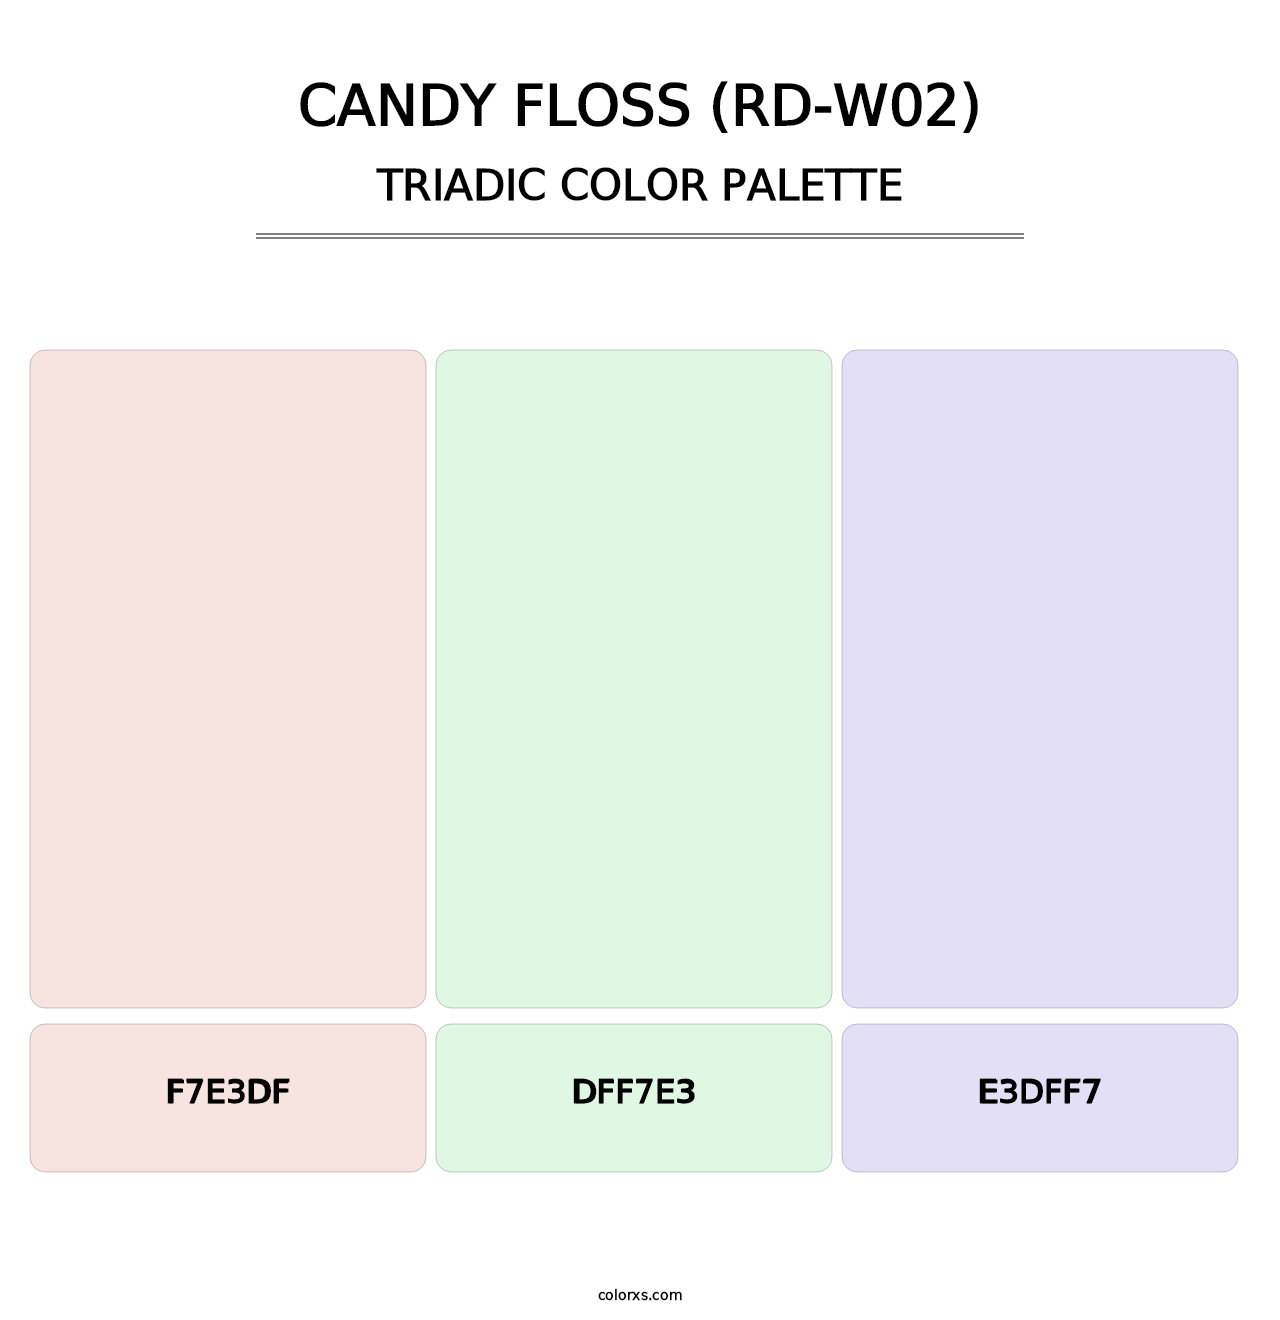 Candy Floss (RD-W02) - Triadic Color Palette